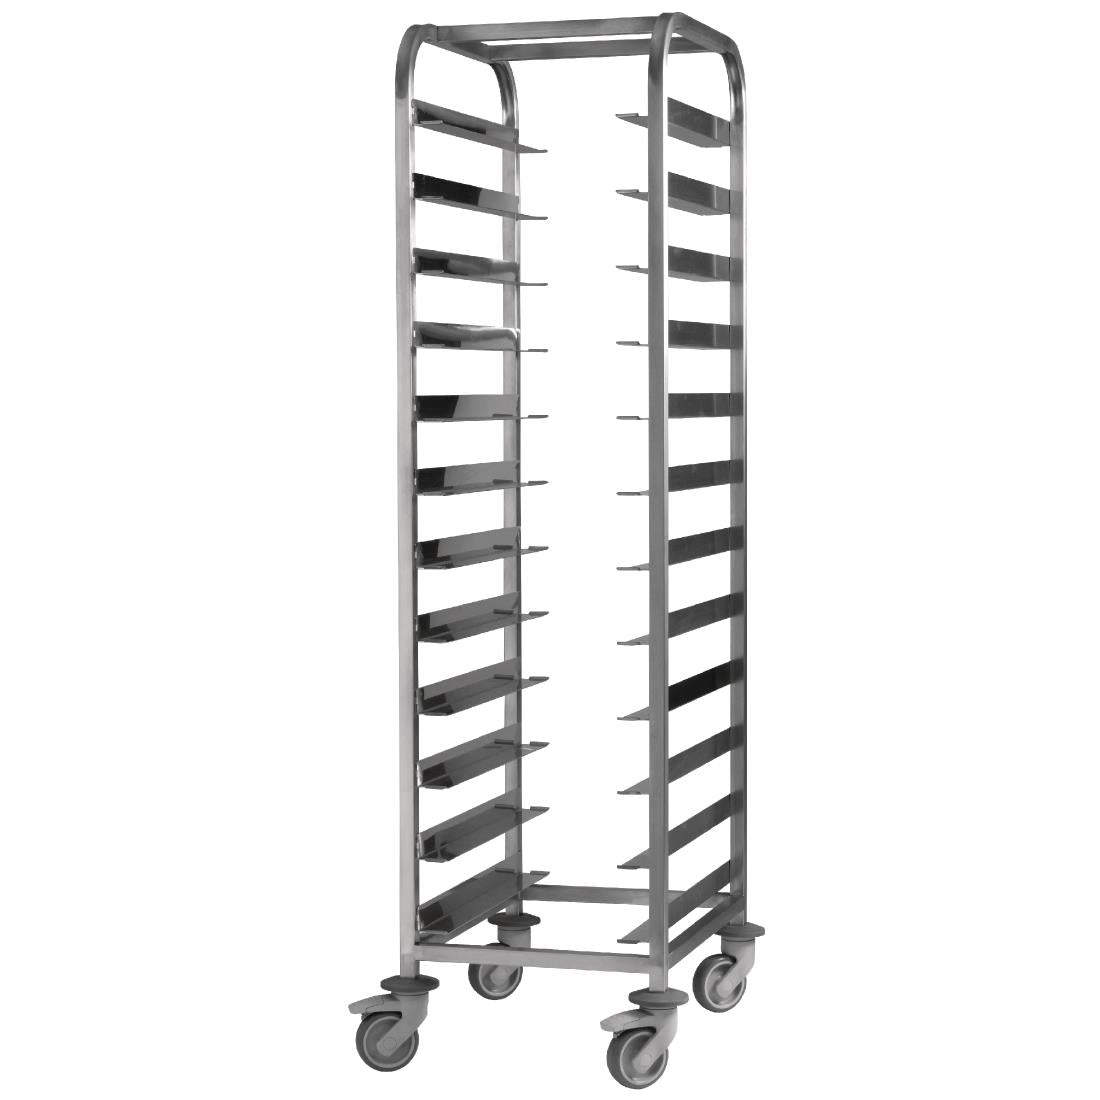 DP292 EAIS Stainless Steel Clearing Trolley 12 Shelves JD Catering Equipment Solutions Ltd